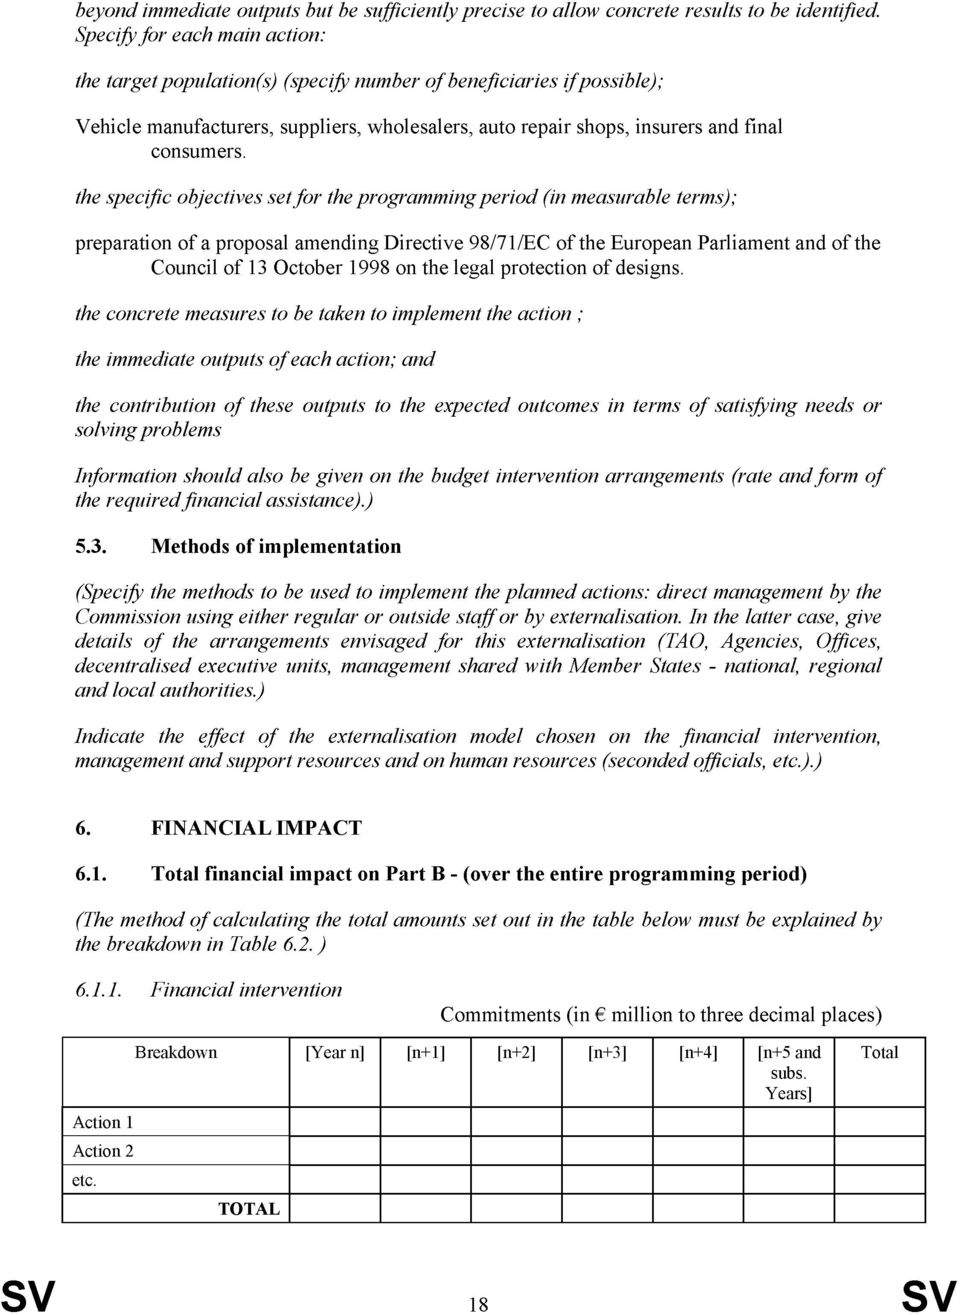 the specific objectives set for the programming period (in measurable terms); preparation of a proposal amending Directive 98/71/EC of the European Parliament and of the Council of 13 October 1998 on